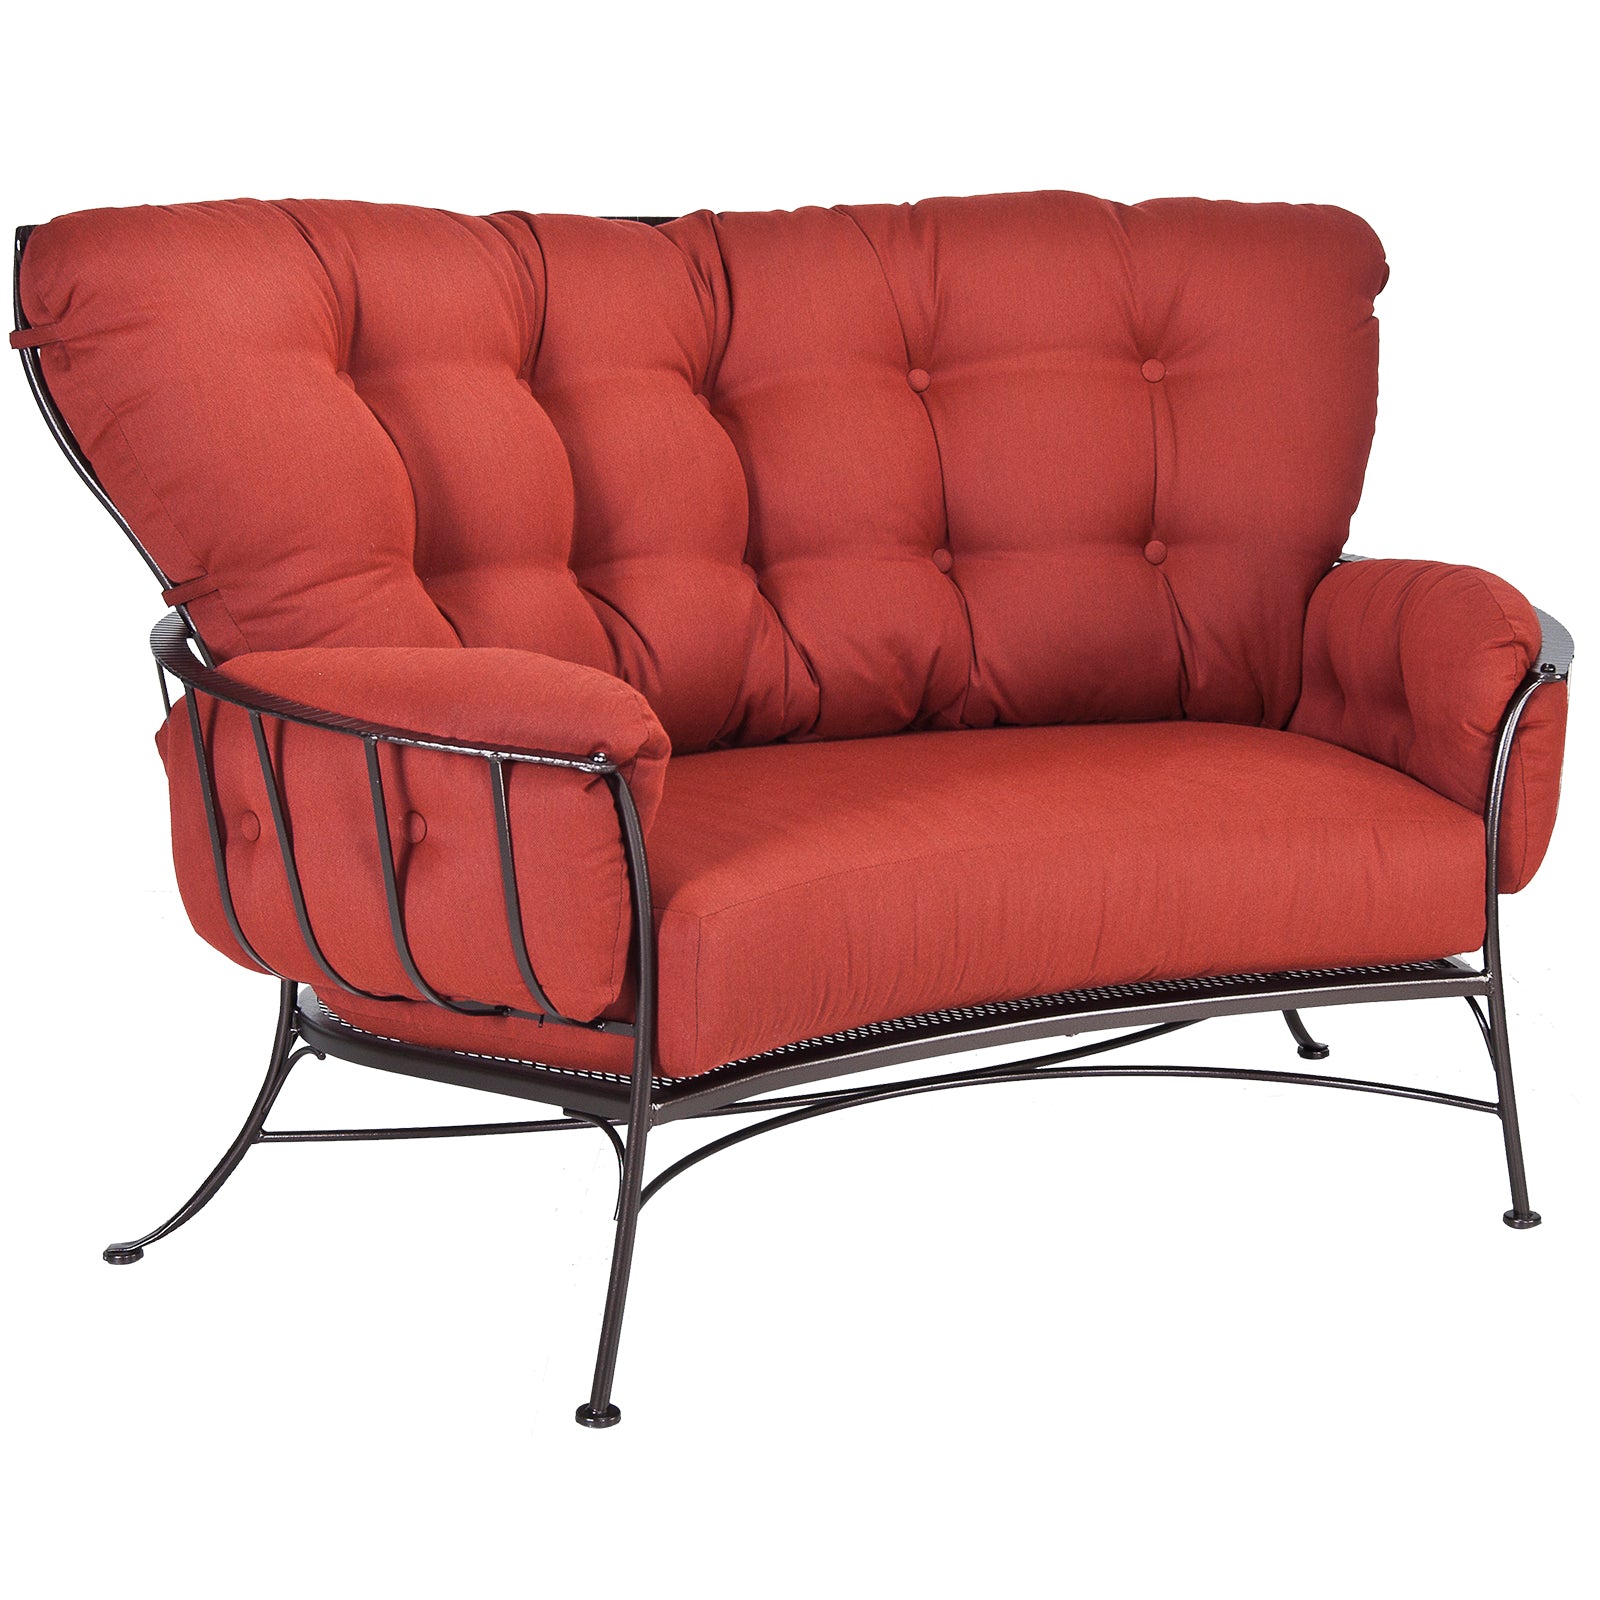 Monterra Urban Scale Crescent Love Seat by Ow Lee